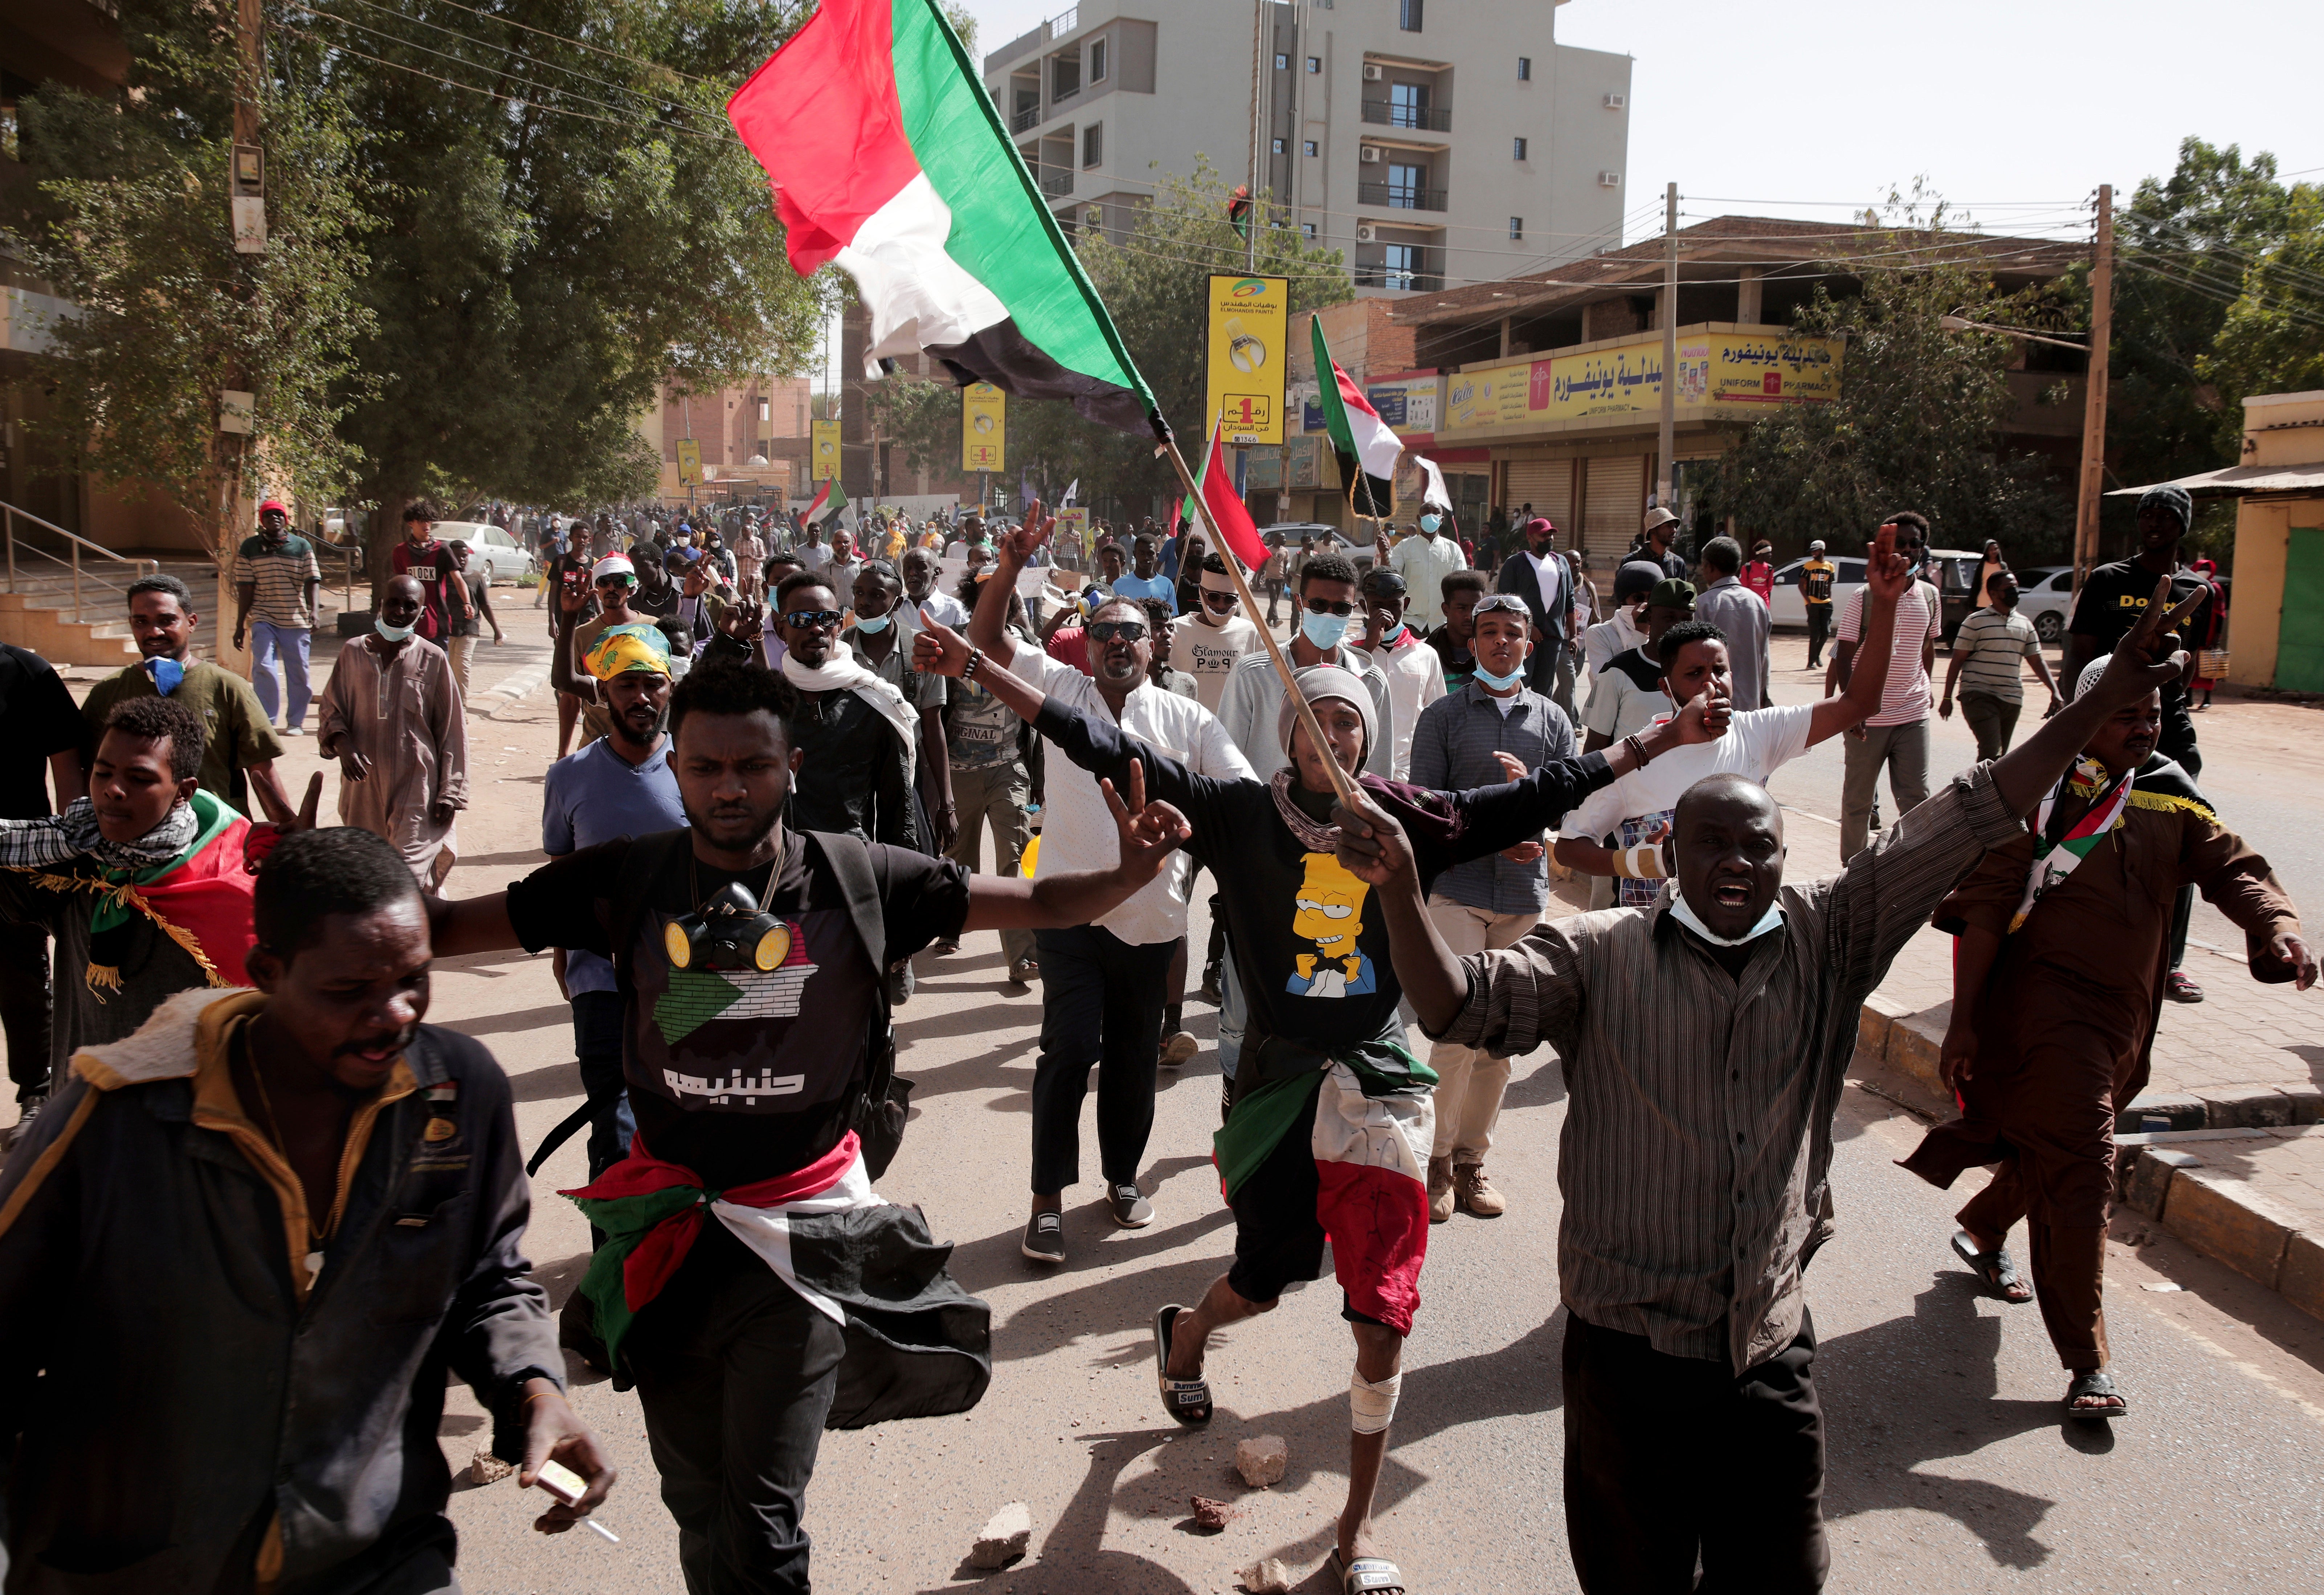 People march at a protest in Khartoum, Sudan, 17 January 2022